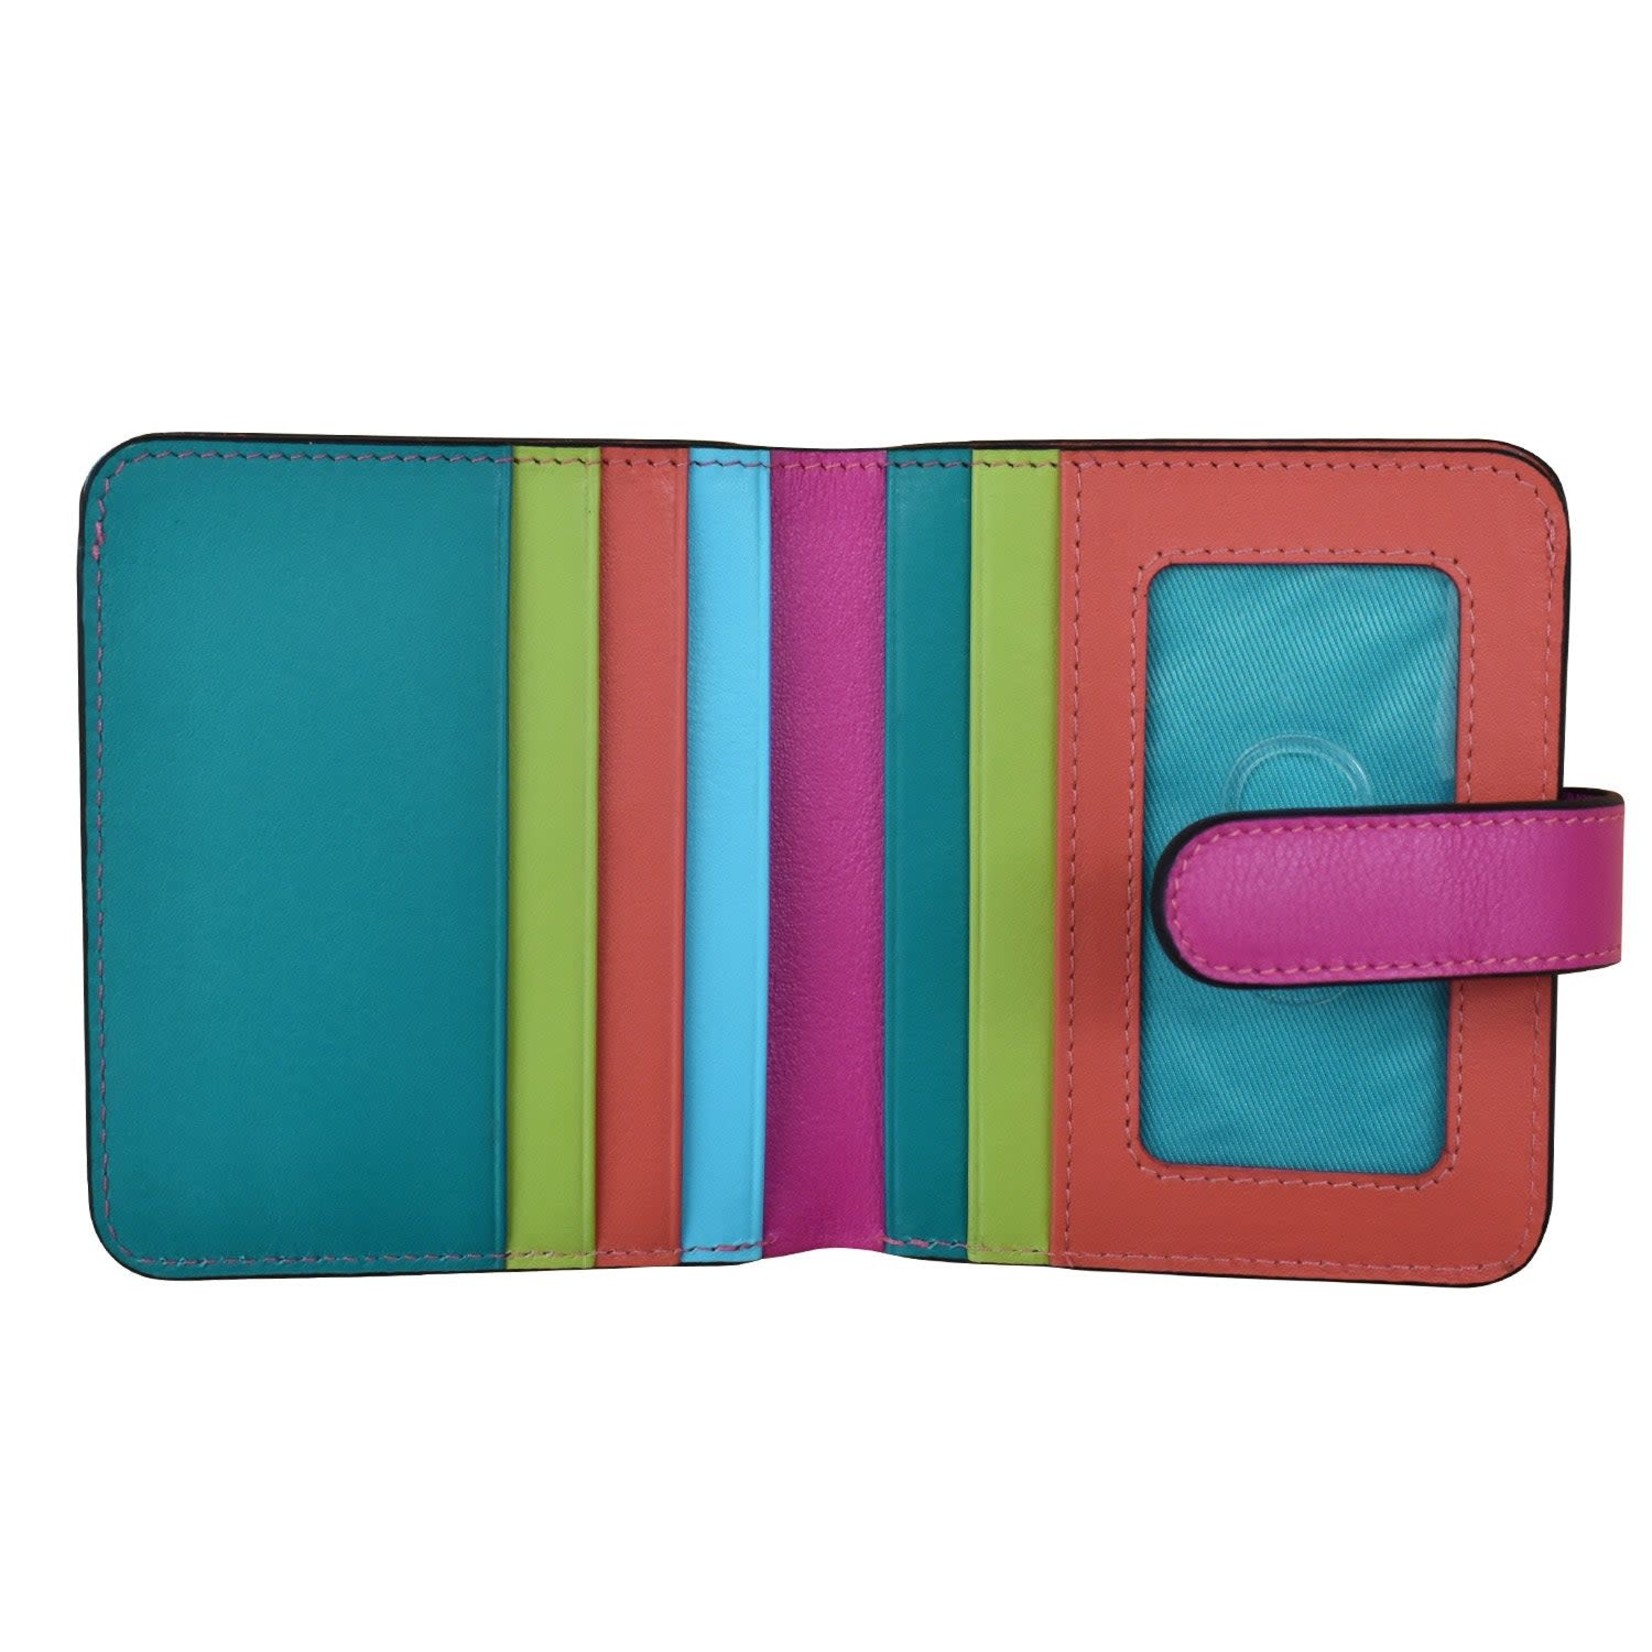 Leather Handbags and Accessories 7301 Paradise Multi - RFID Small Wallet